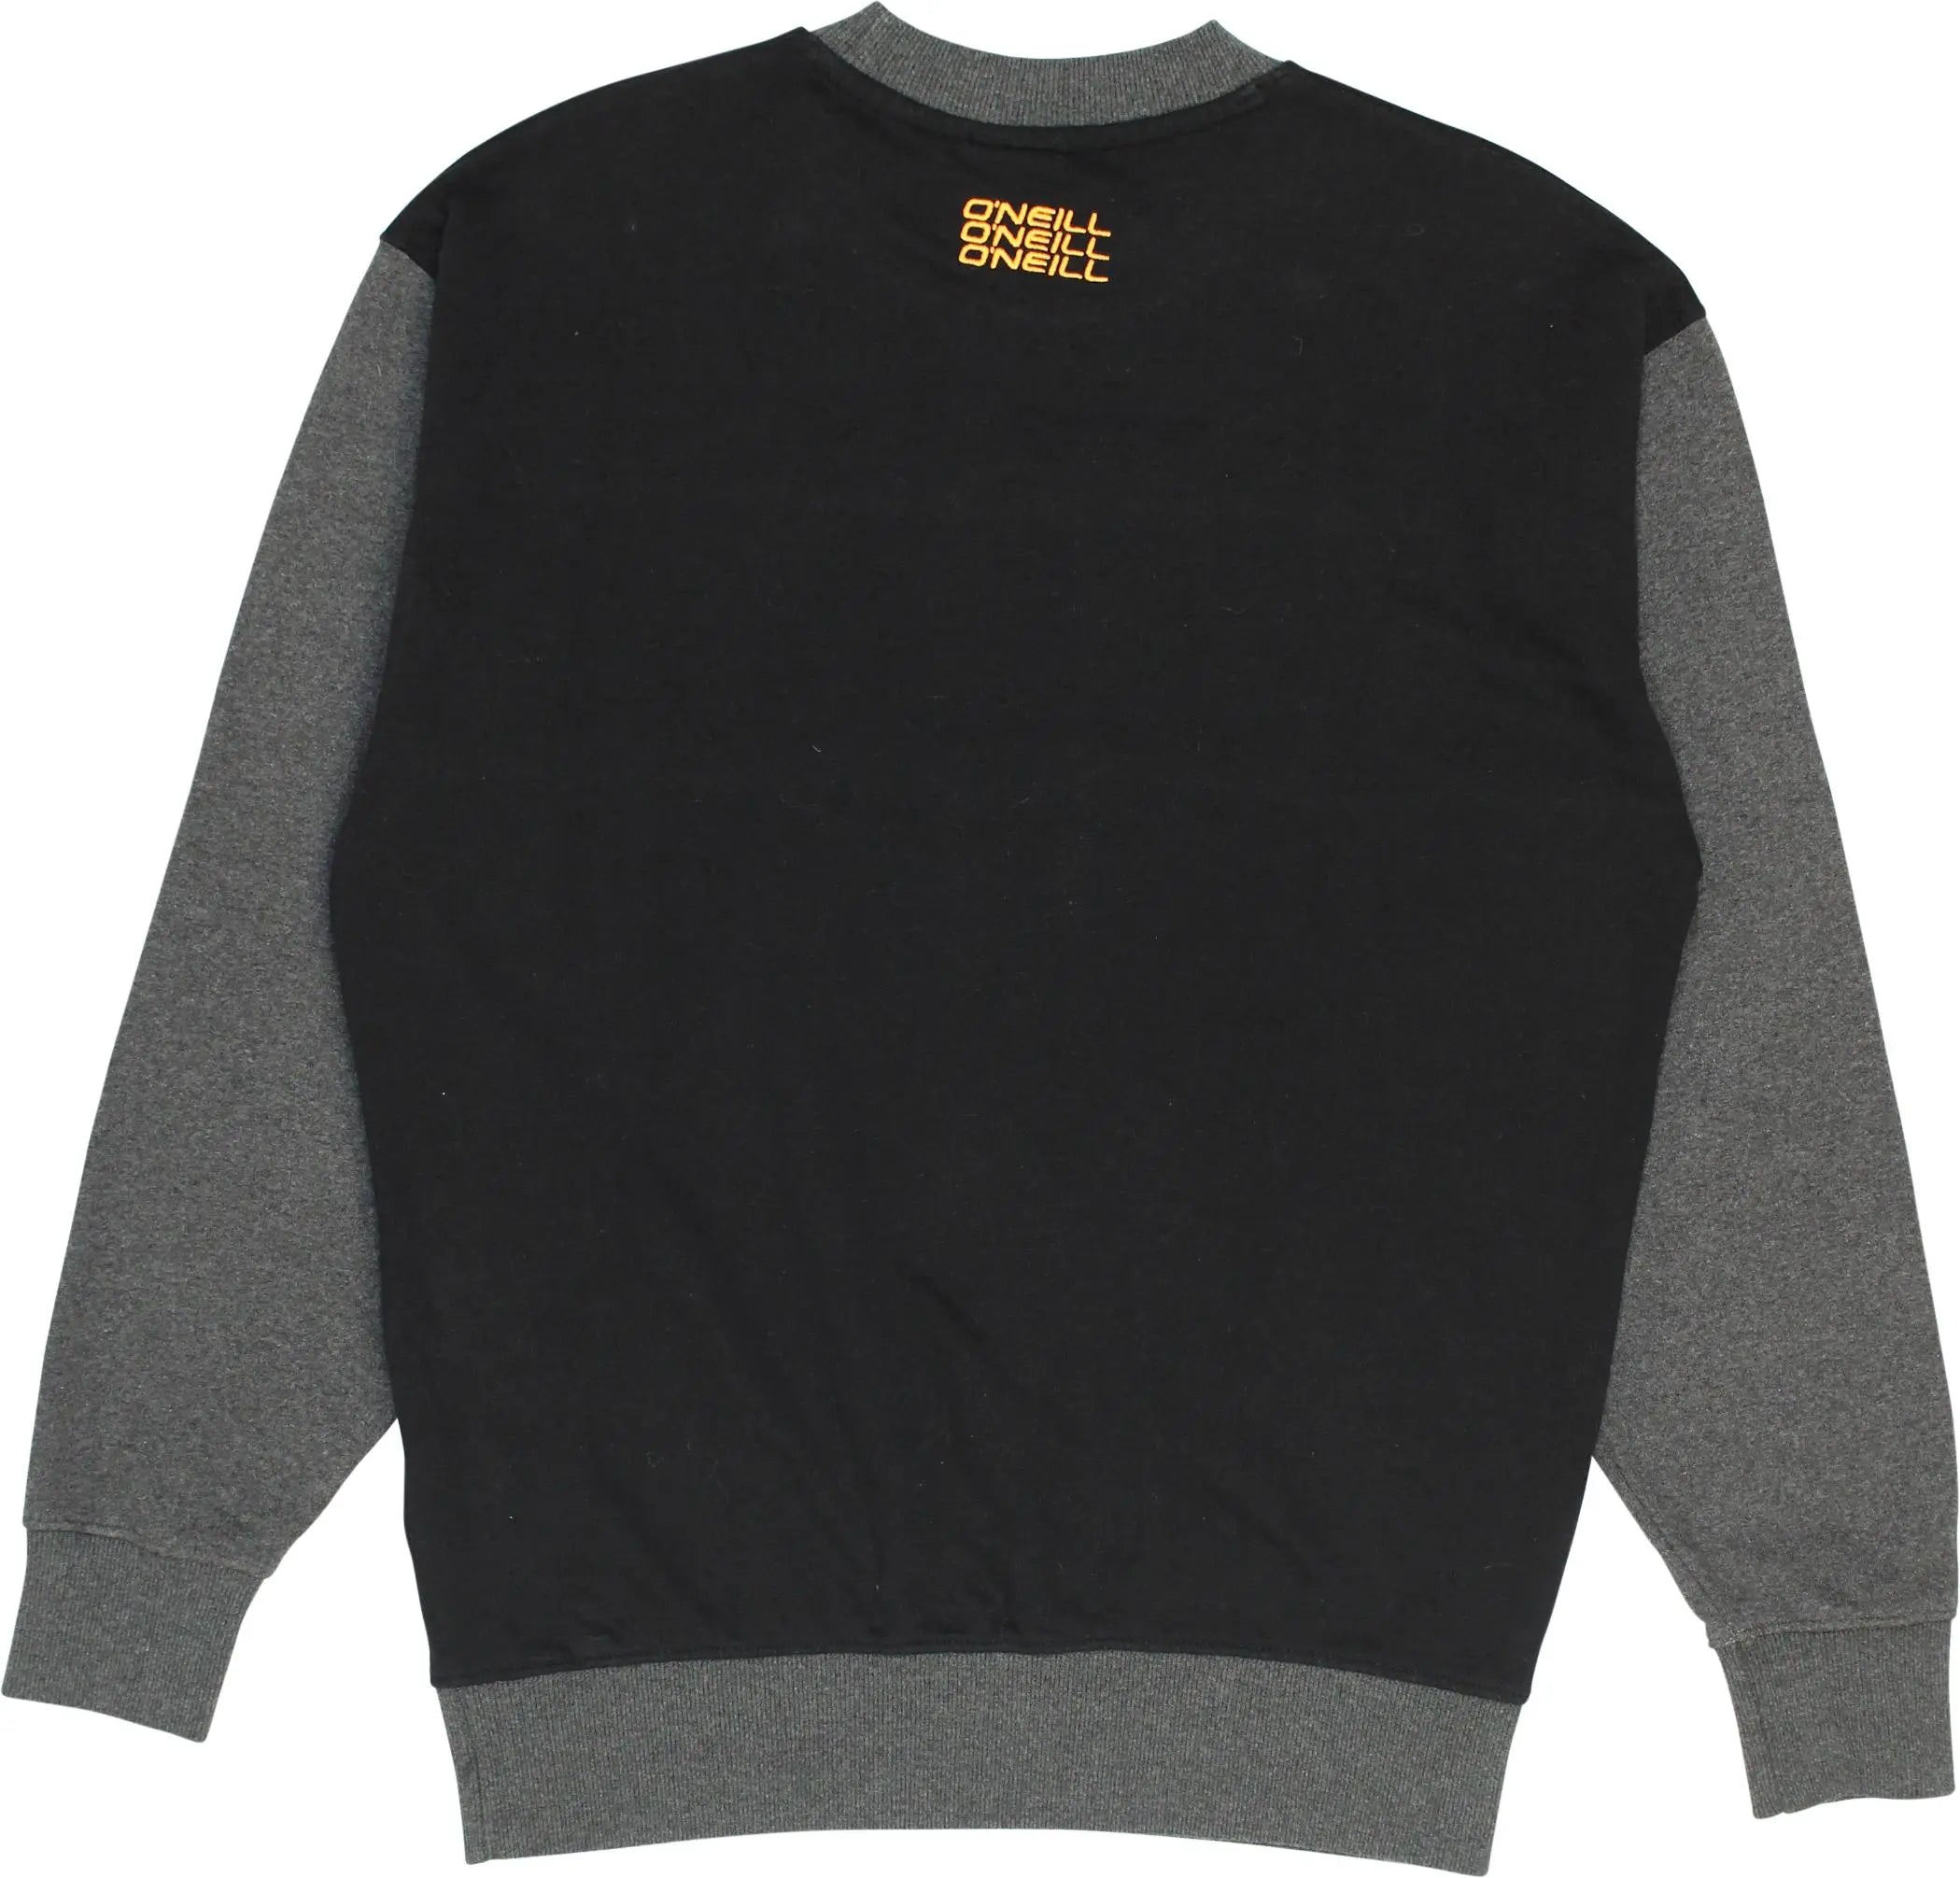 O'Neill - Black Sweatshirt by O'Neill- ThriftTale.com - Vintage and second handclothing